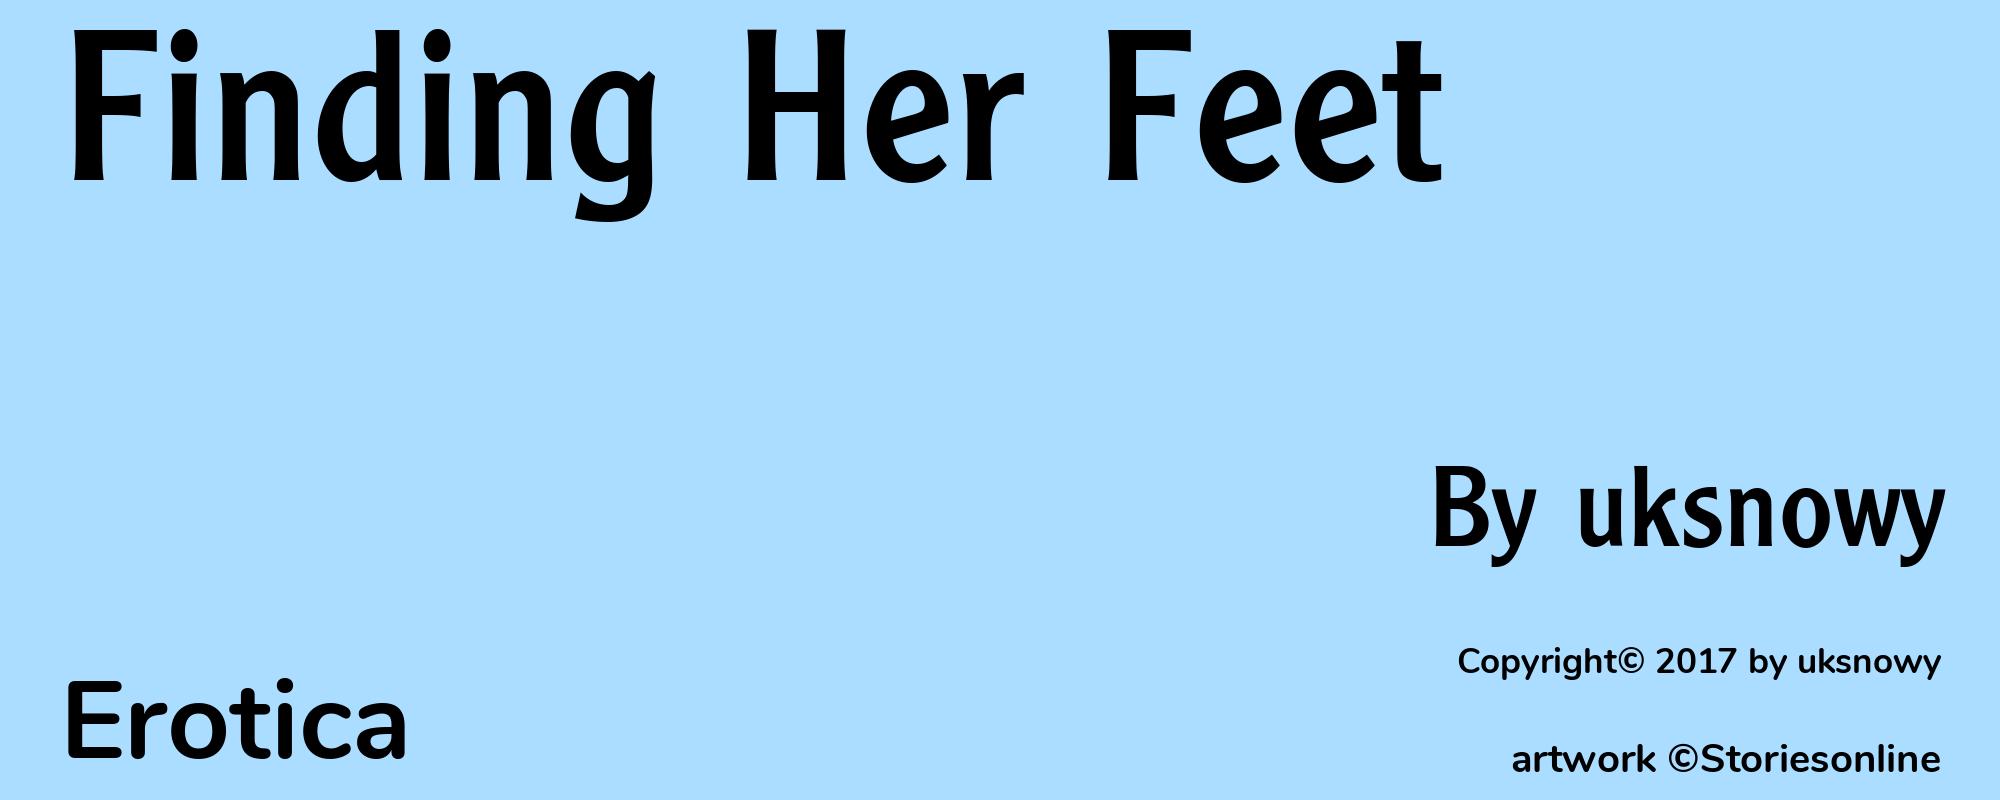 Finding Her Feet - Cover